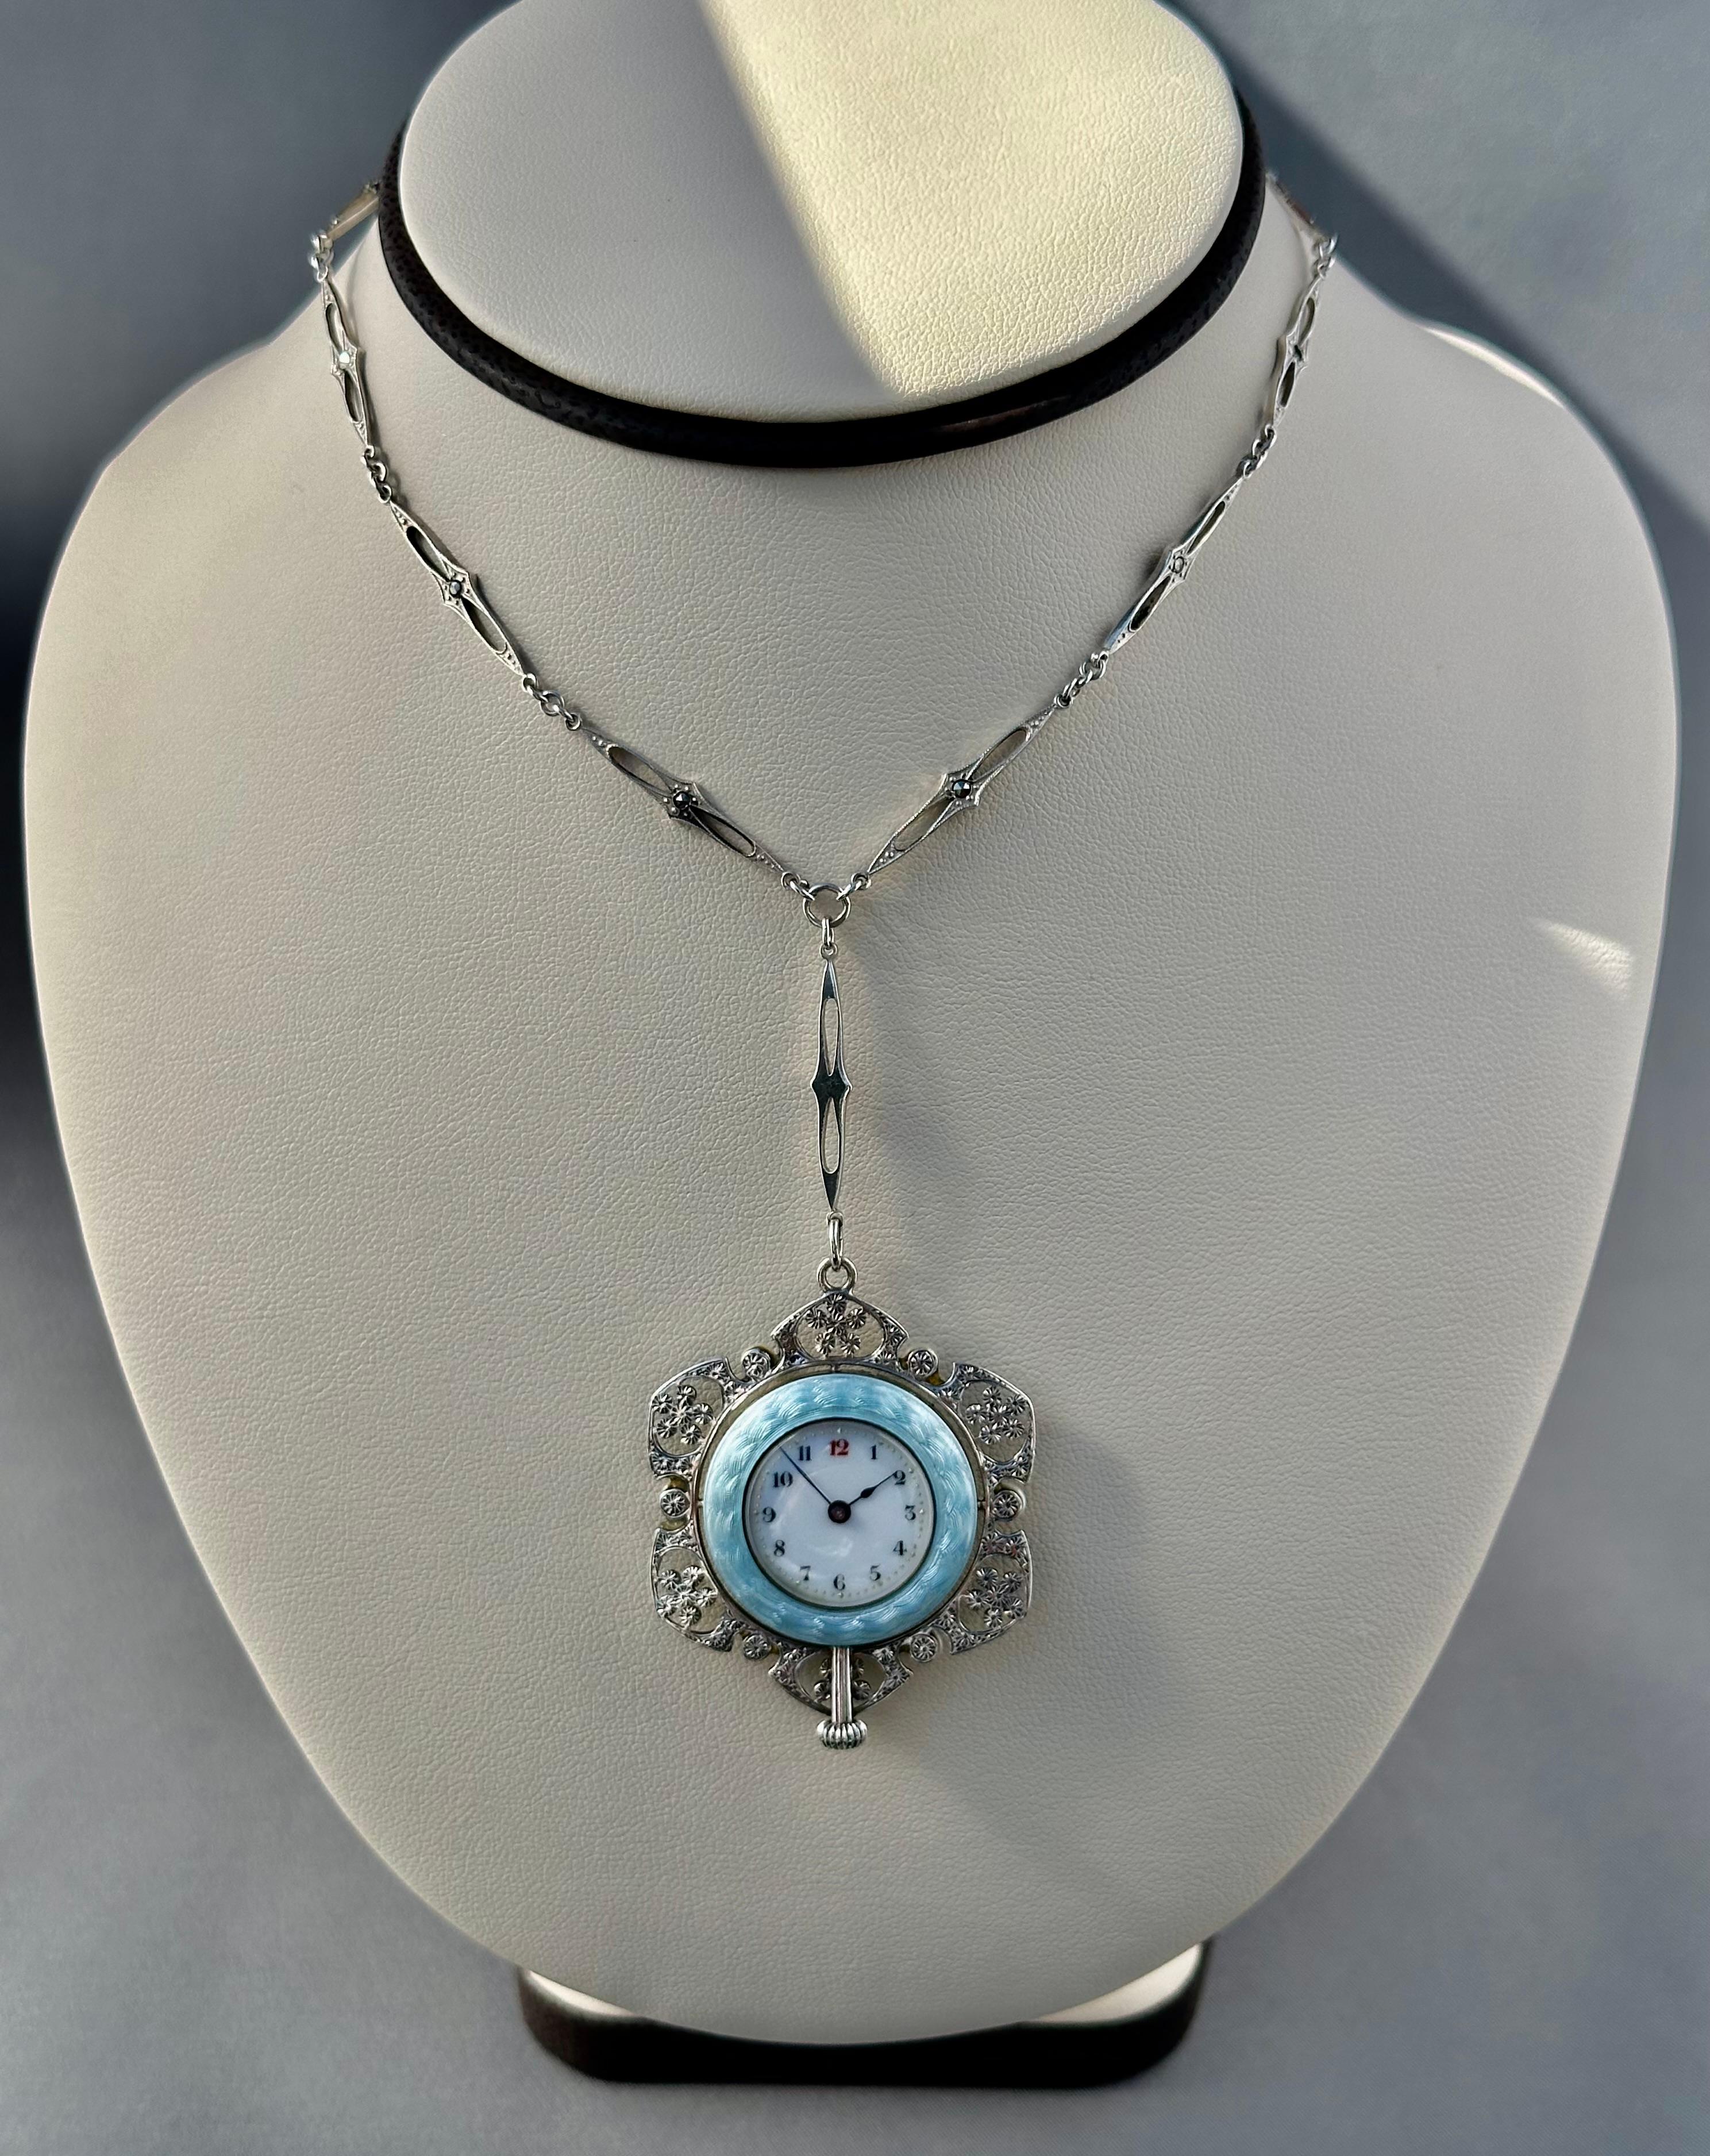 Edwardian vintage watch pendant in original condition! 
Designed in Sterling Silver, Marcasite and Natural Pearls Pendant Watch
Featuring a powder blue guilloche enameled with 24K Gold
In the Dial and Back Cover are hanging flowers and blue bow
The